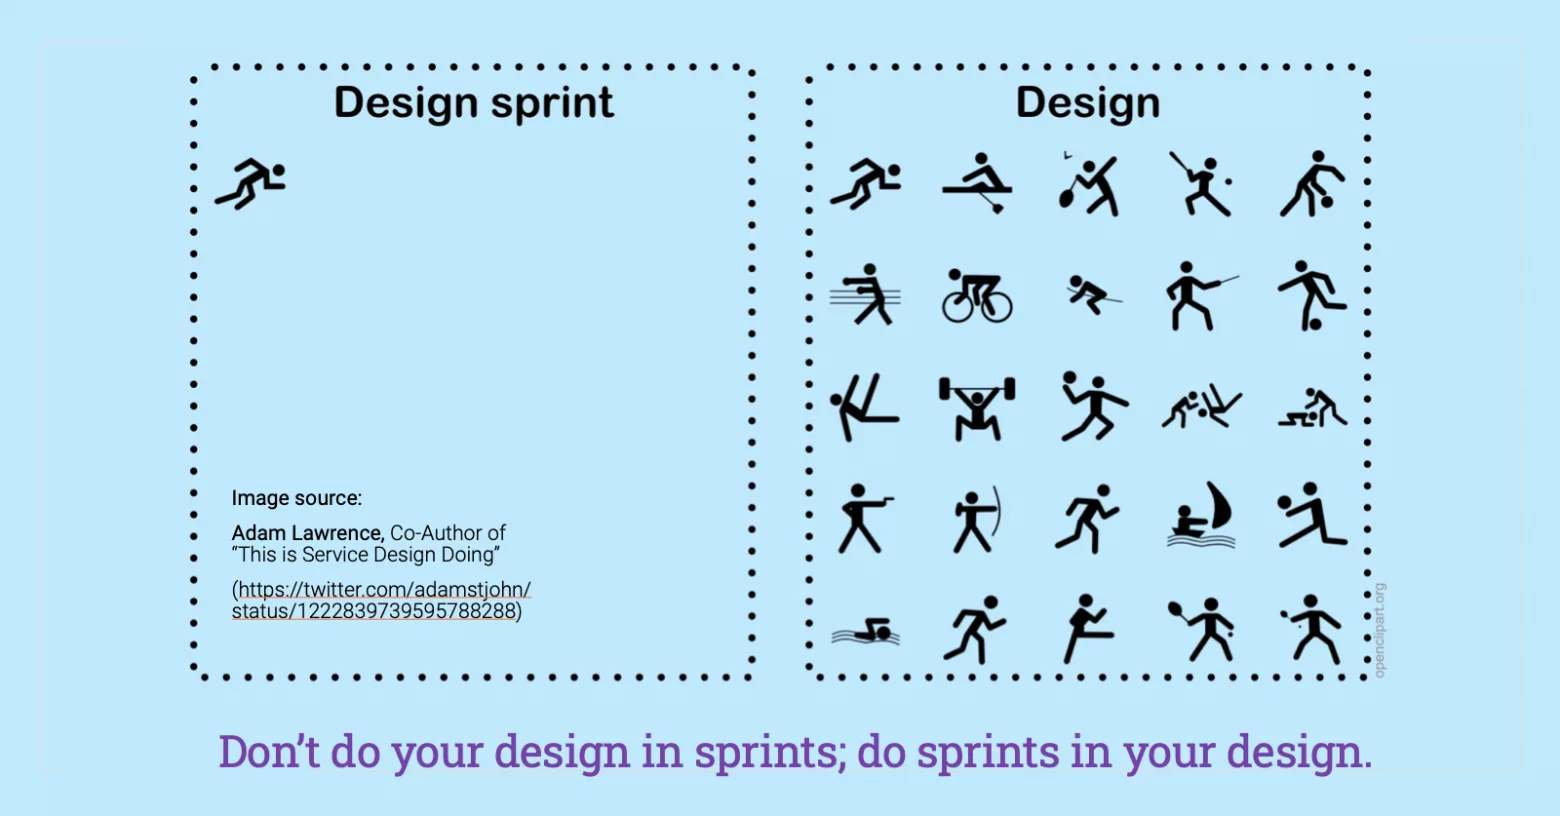 Design Sprints — after a Tweet by Adam Lawrence, Author of “This is Service Design Doing”